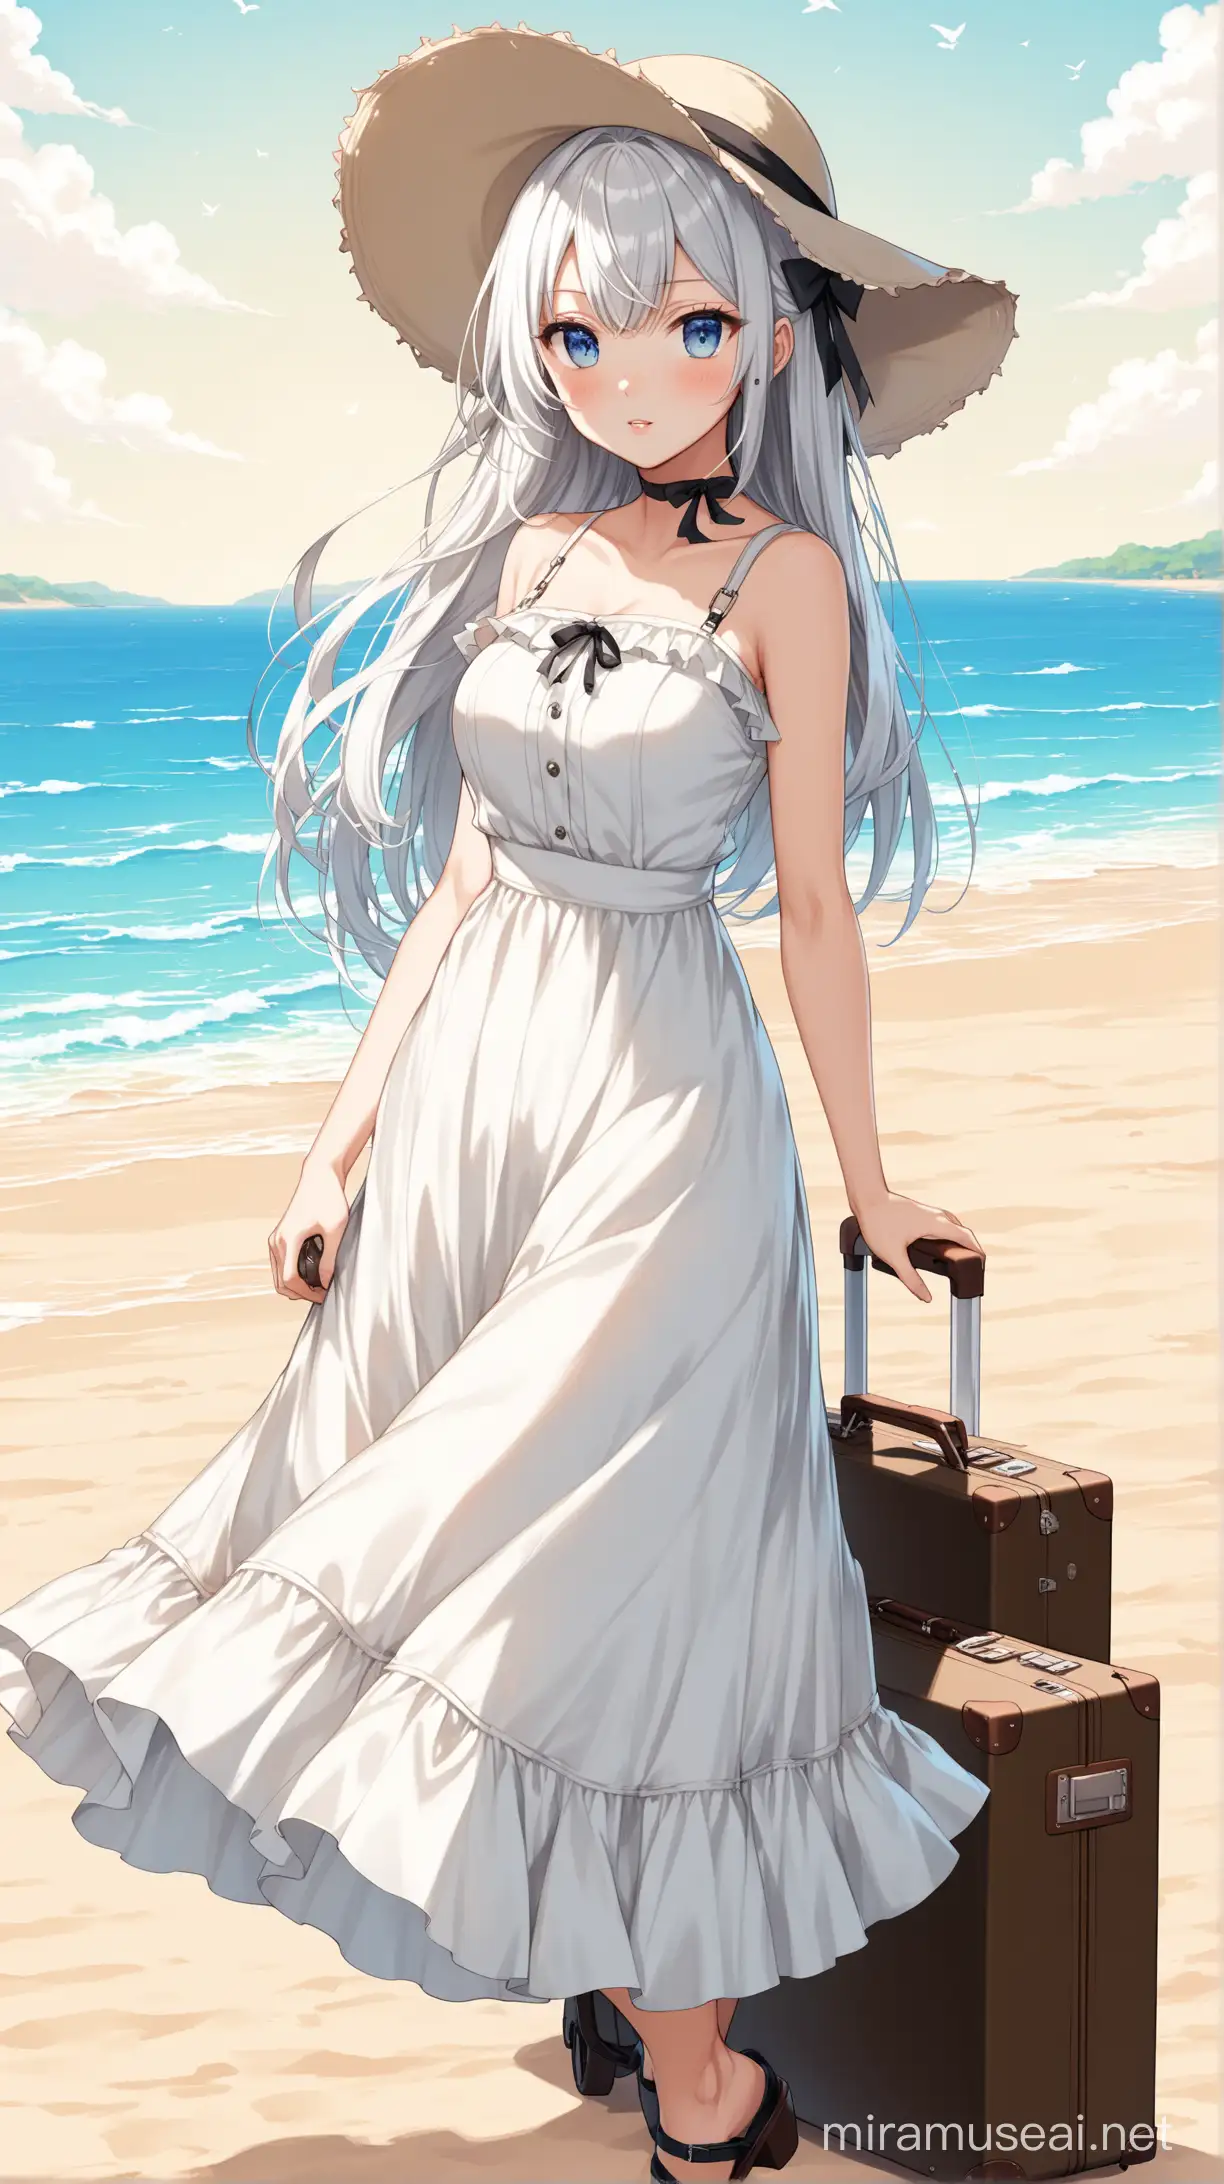 Elegant Kei Shirogane in White Sundress with Beach Hat and Vintage Suitcase